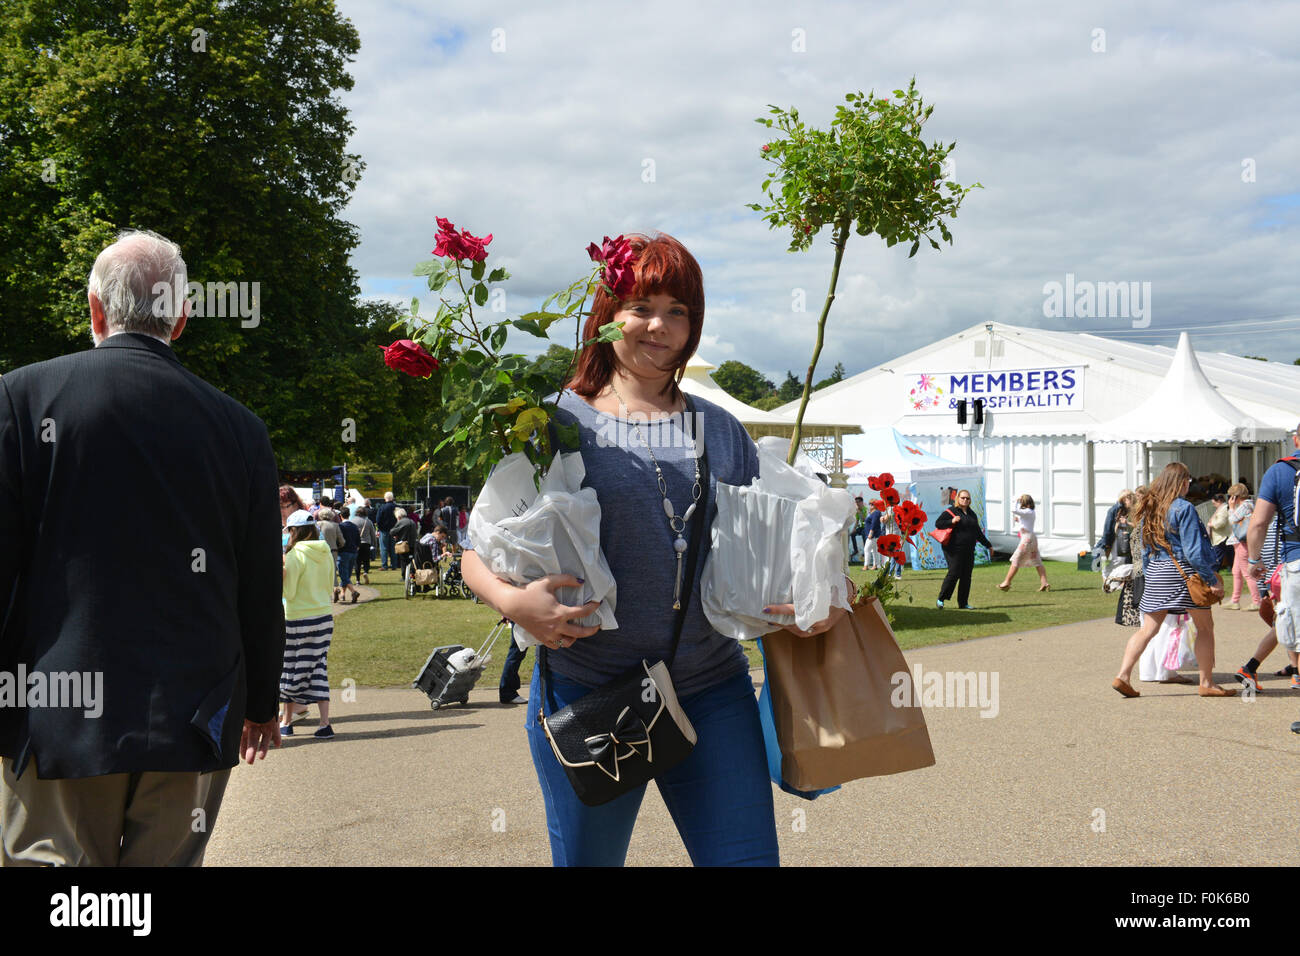 Woman carrying buying flowers and plants at Shrewsbury Flower Show 2015 Stock Photo